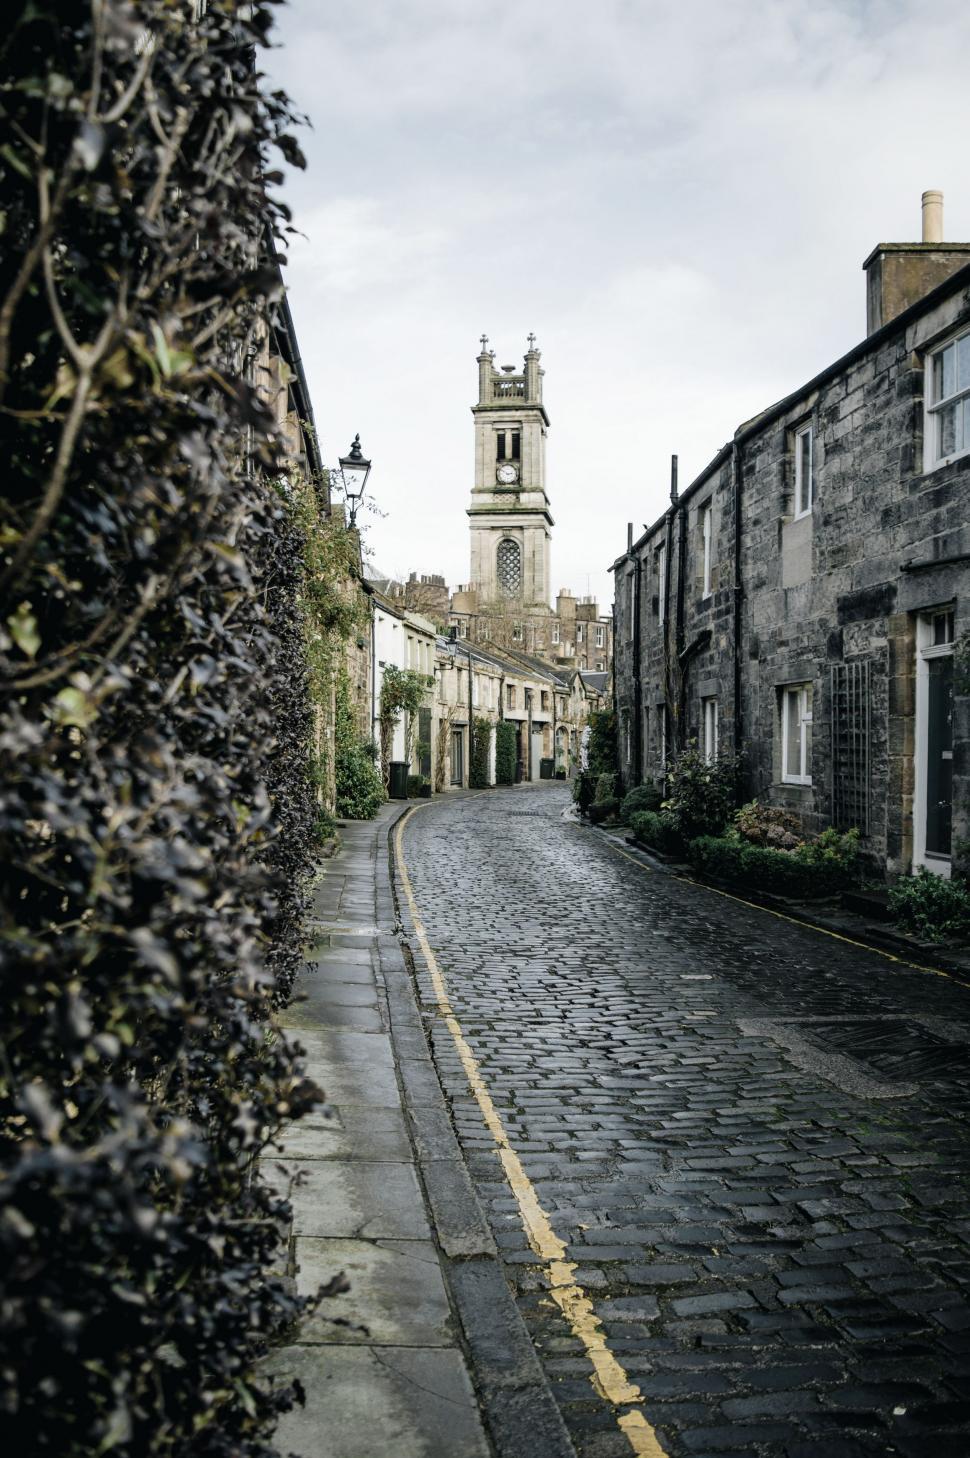 Free Image of Historic Cobblestone Street With Clock Tower 